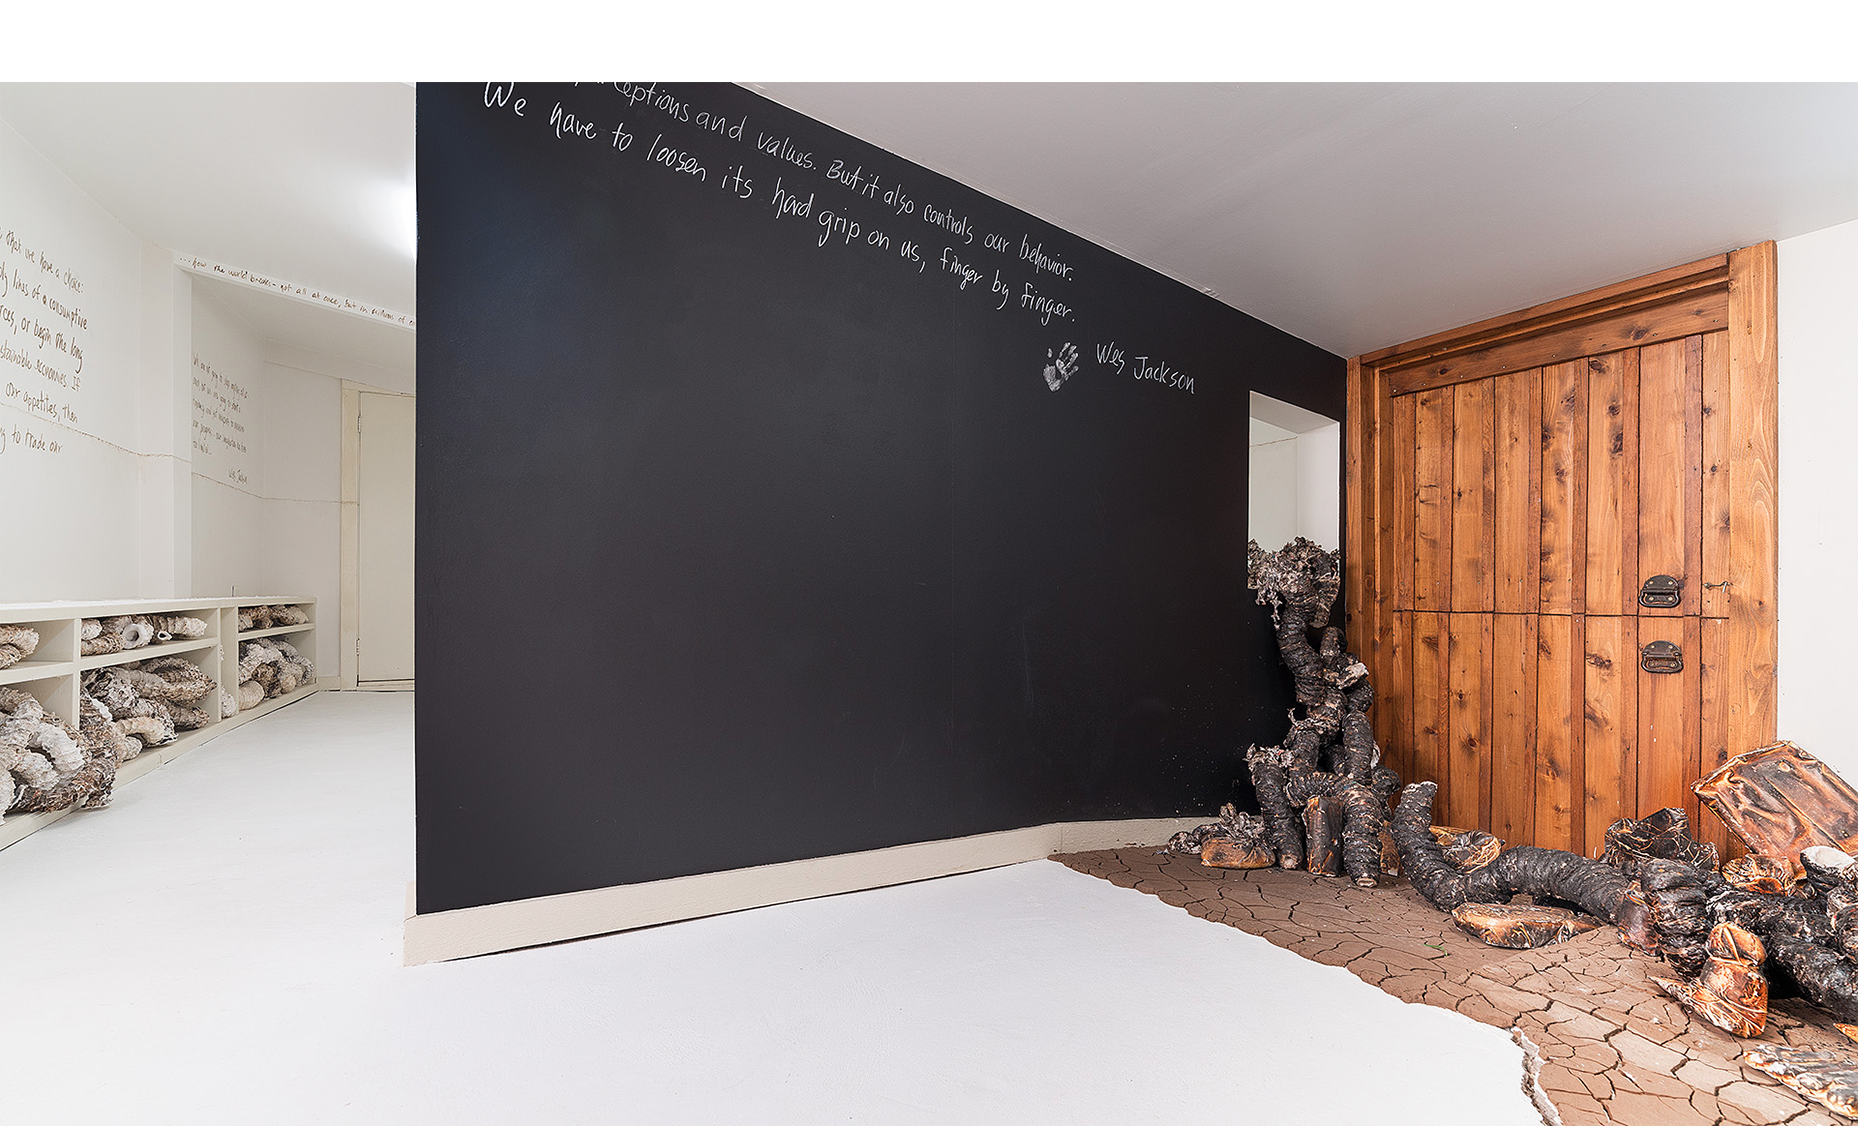  Installation detail of charred organic forms “climbing” through window, cracked earth and participatory blackboard wall with text by Wes Jackson. 